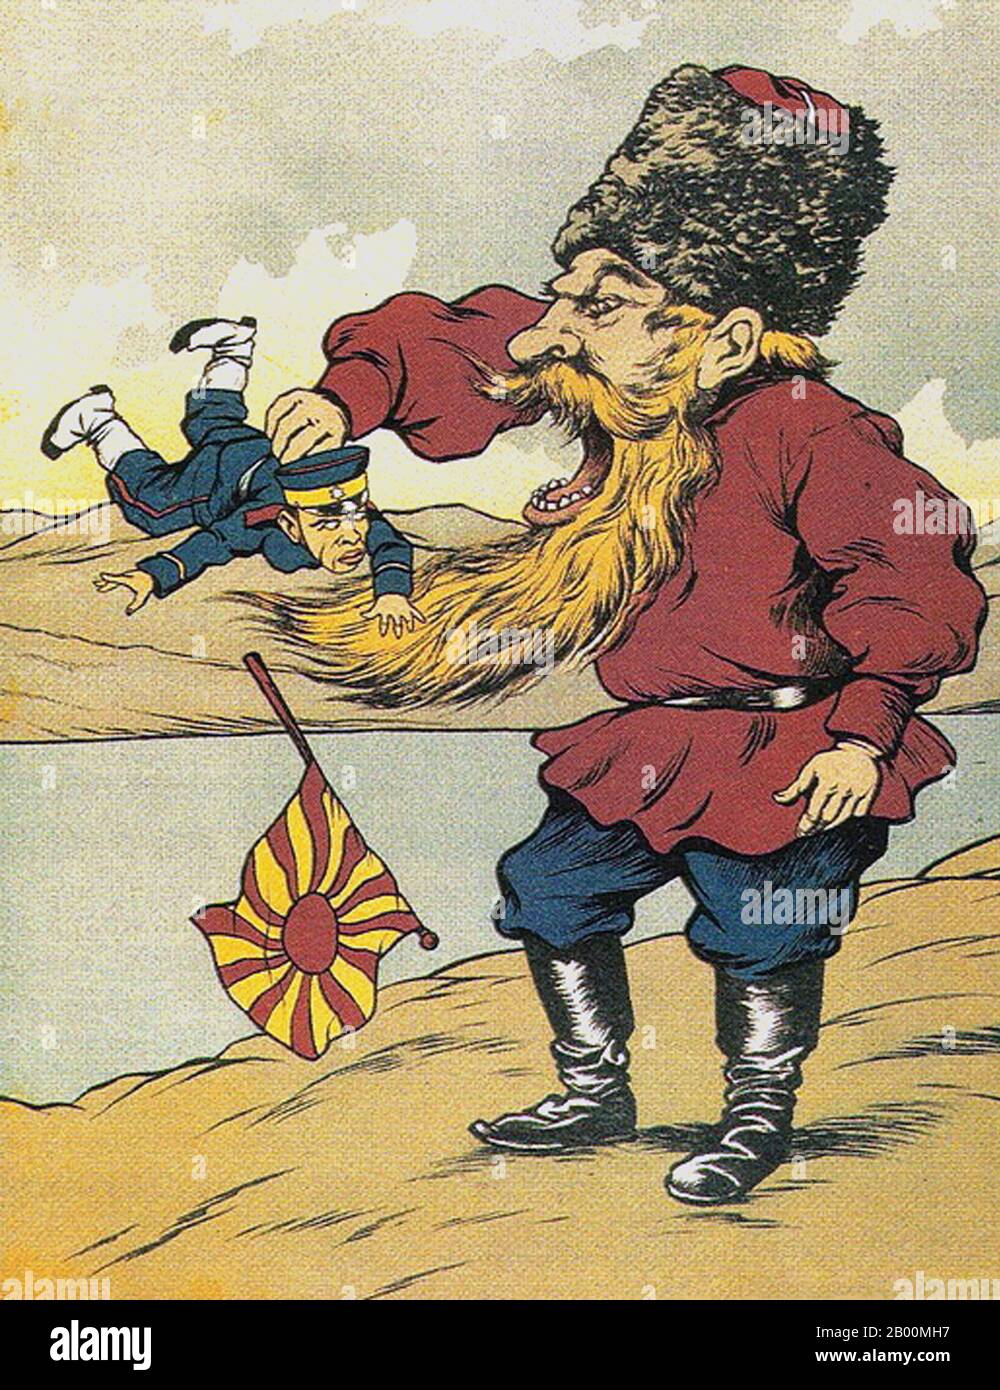 Russia: Russo–Japanese War (10 February 1904 – 5 September 1905) Russian propaganda poster showing 'The Breakfast of the Cossack', 1904-1905.  The Russo-Japanese War (8 February 1904 – 5 September 1905) was the first great war of the 20th century which grew out of the rival imperial ambitions of the Russian Empire and Japanese Empire over Manchuria and Korea. The resulting campaigns, in which the Japanese military attained victory over the Russian forces arrayed against them, were unexpected by world observers. Stock Photo